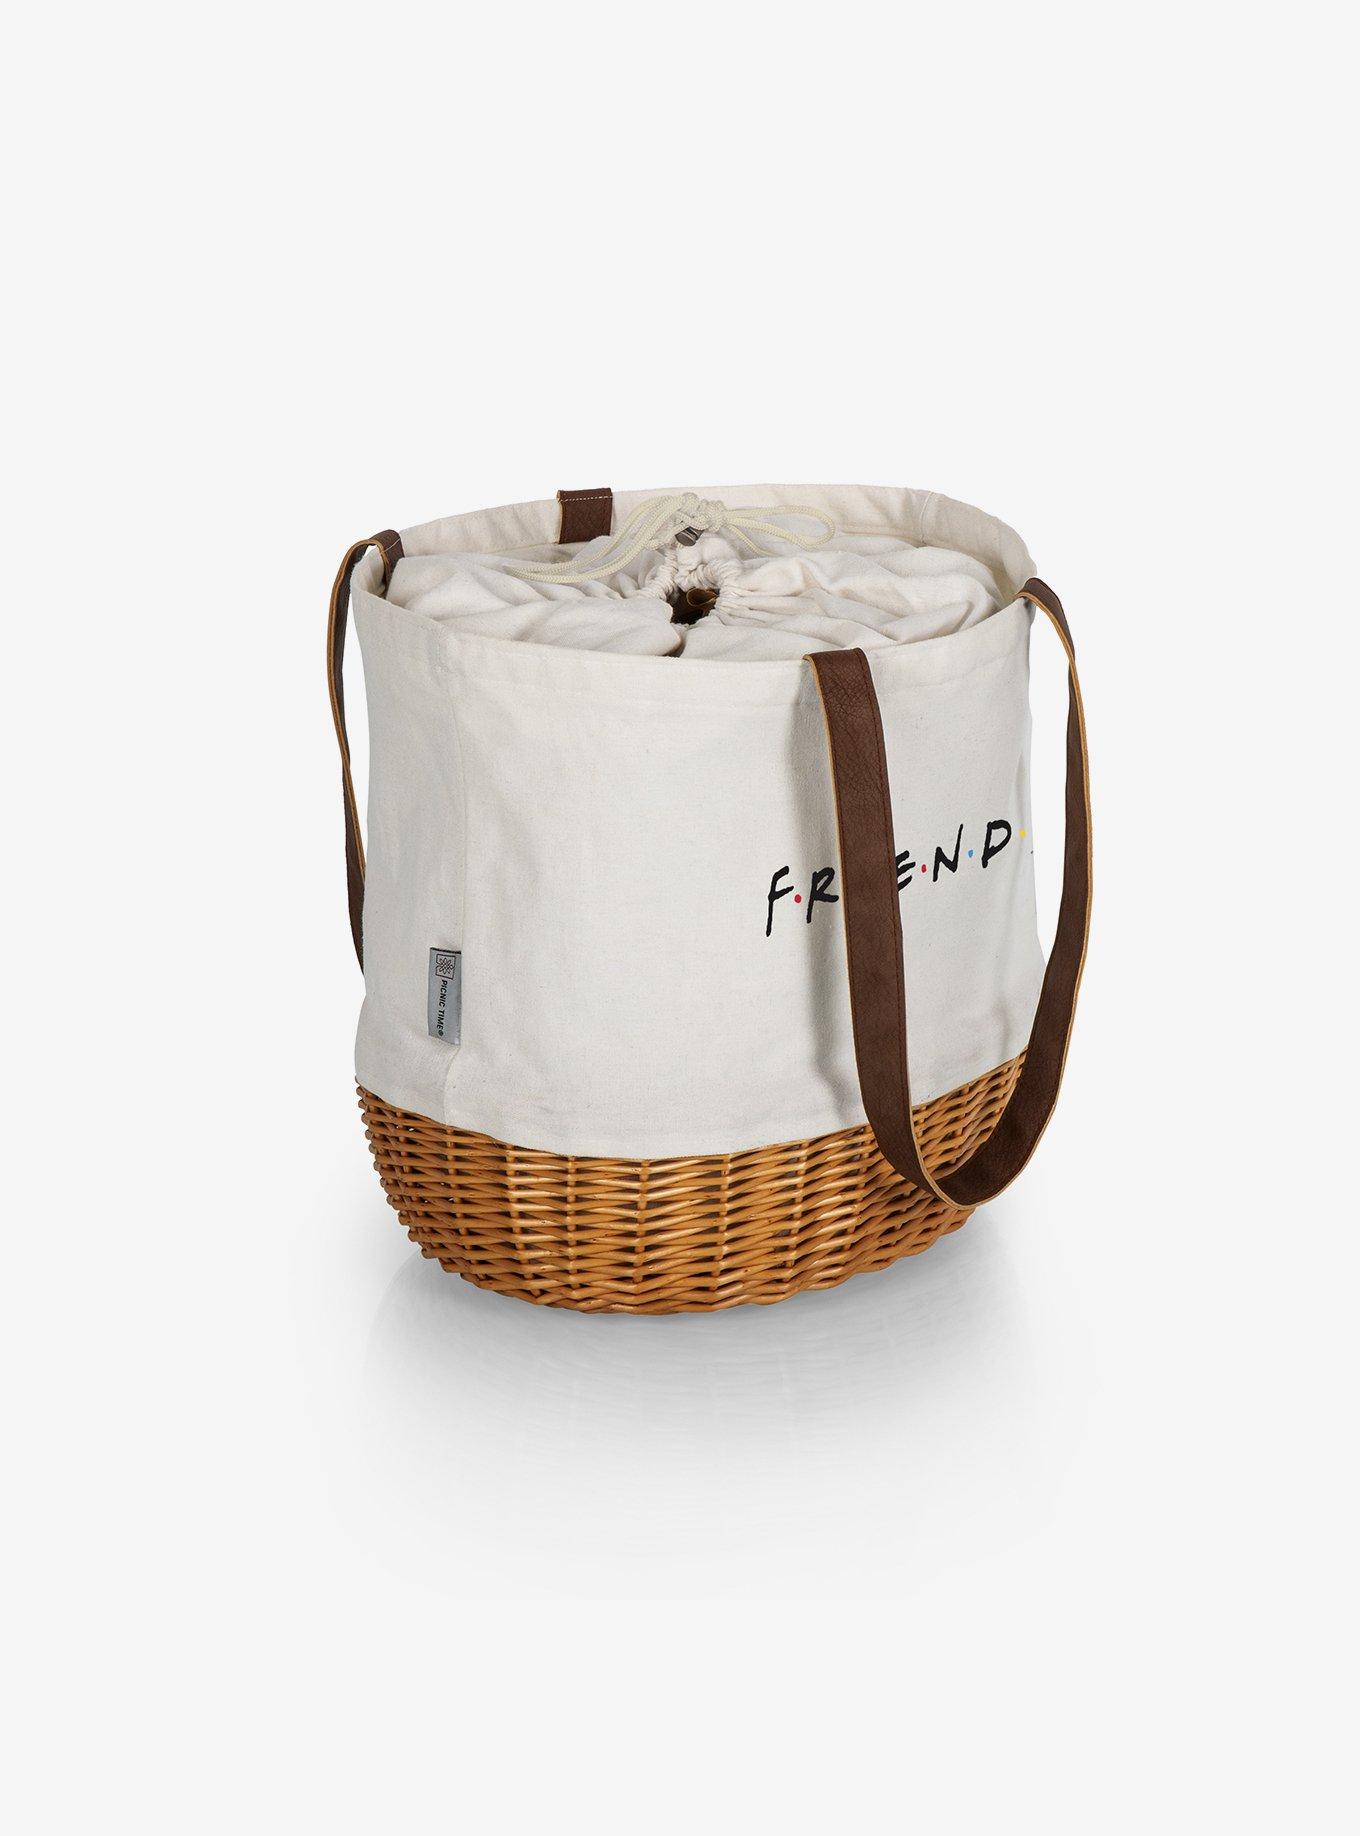 Friends Canvas Willow Basket Tote, , alternate